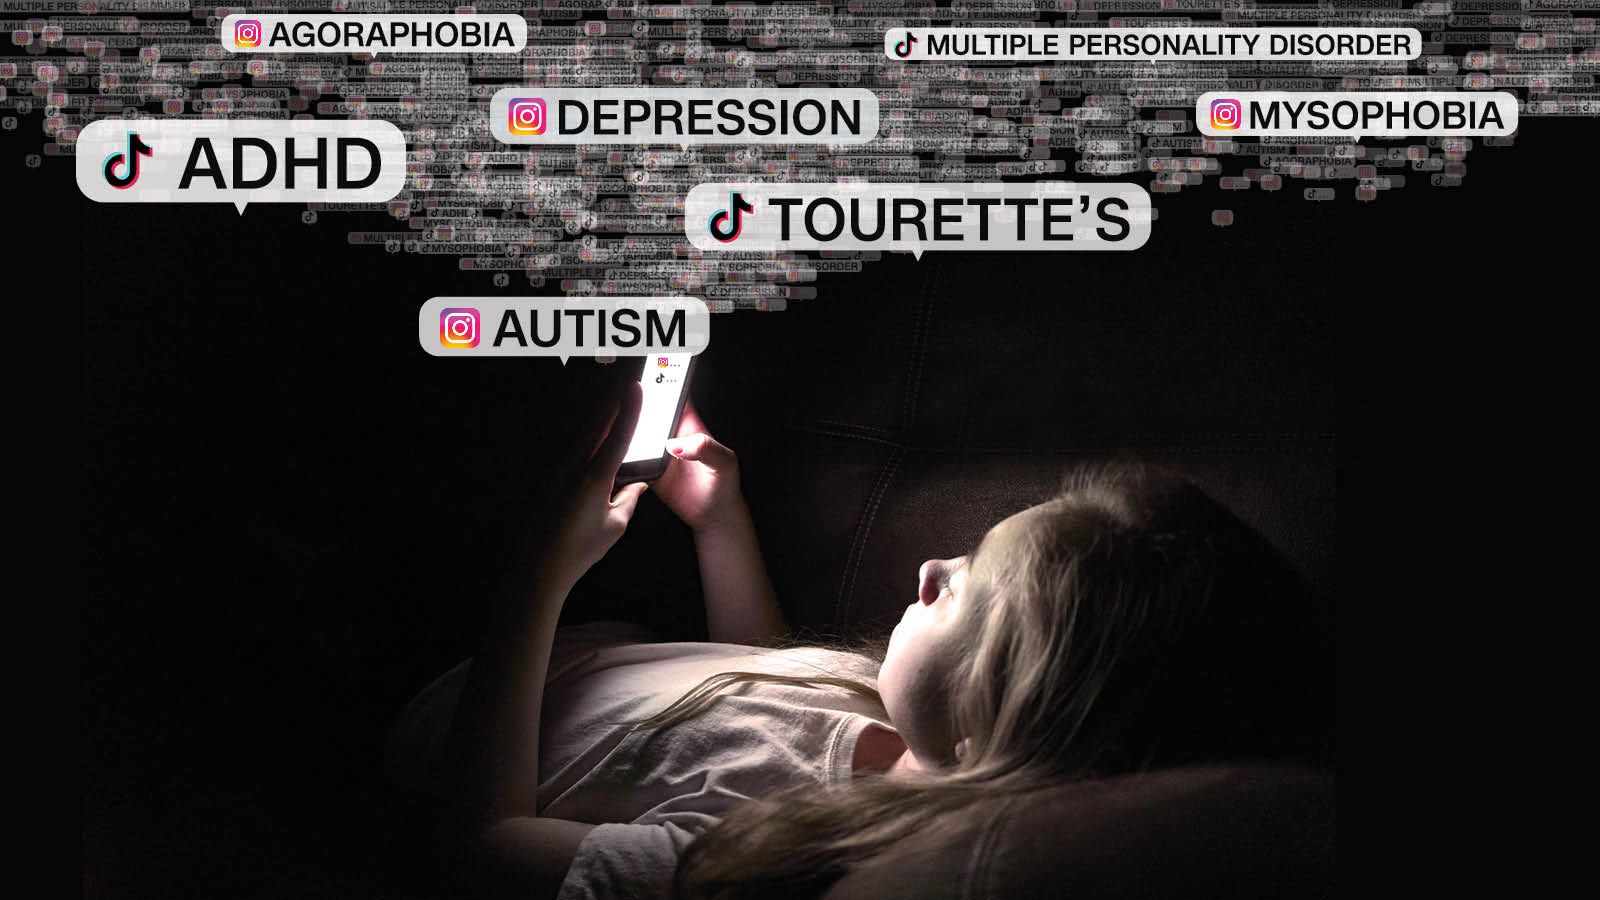 A photo illustration featuring youth on cell phone, images such as "ADHD" and "depression" above th...